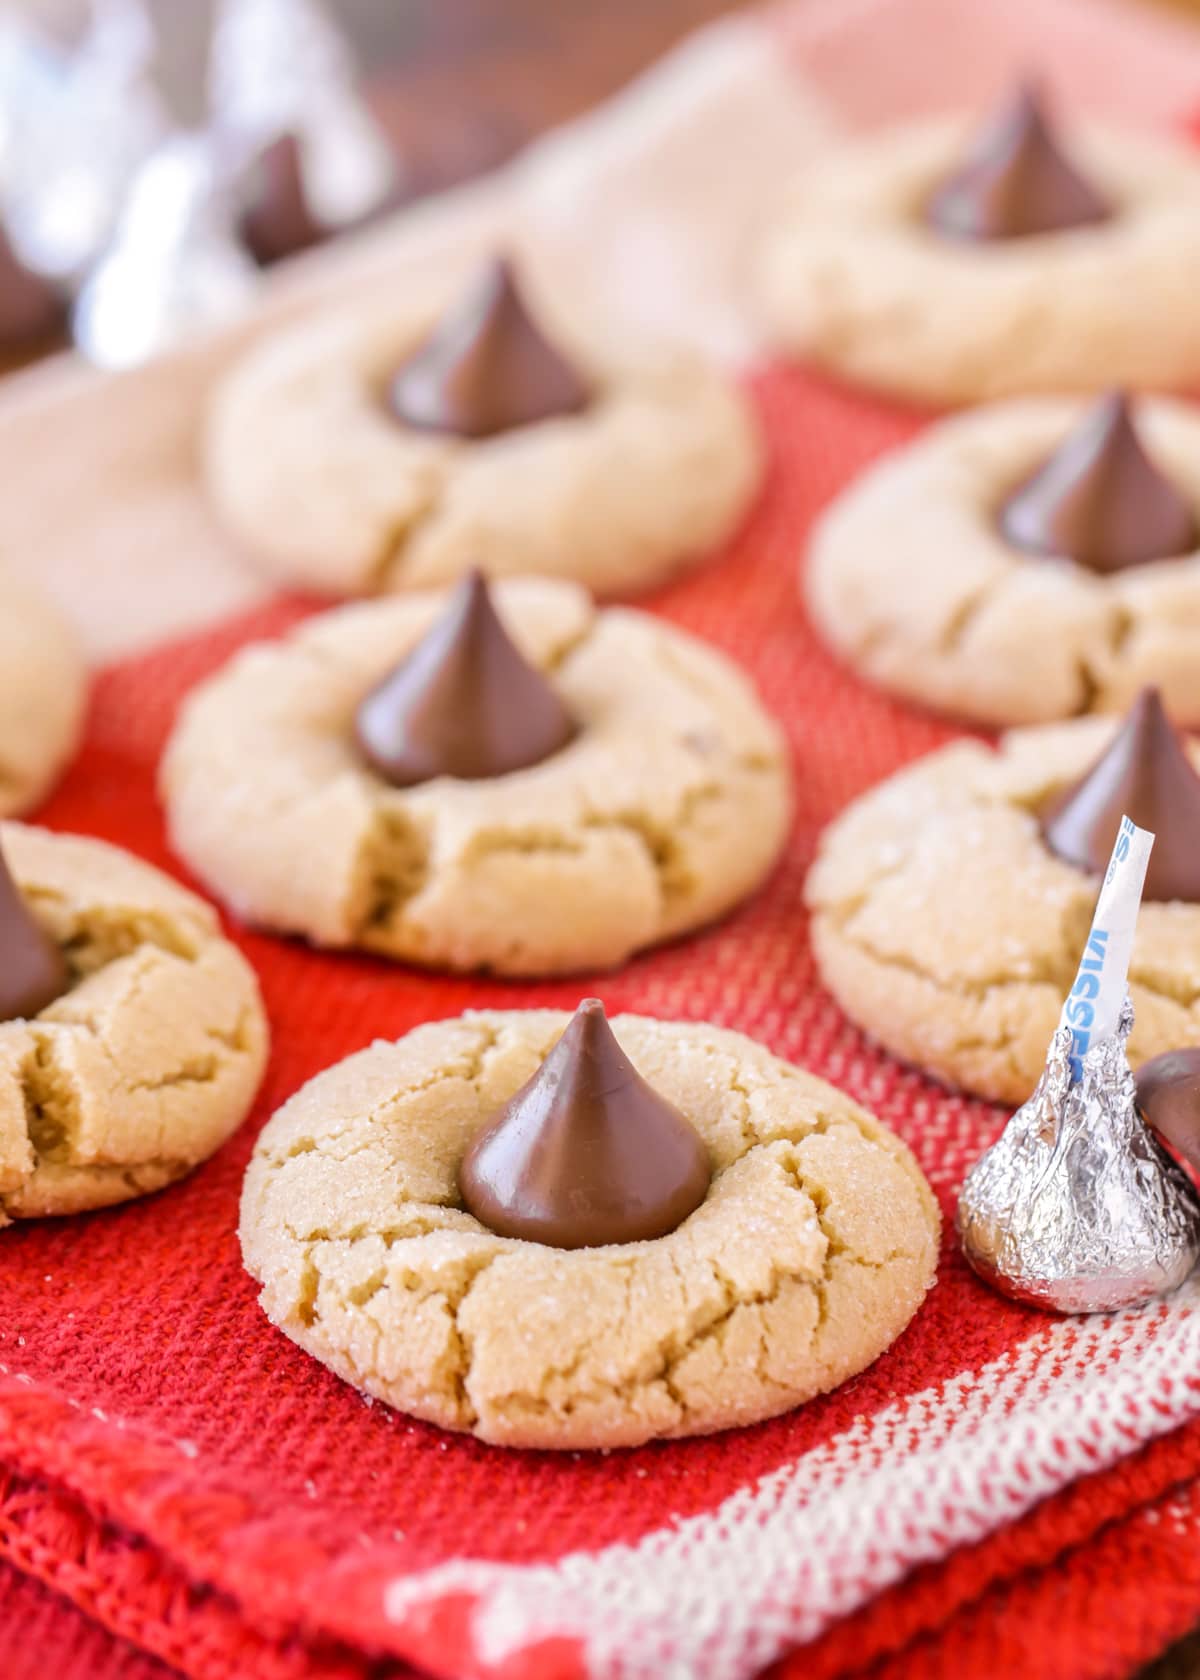 Peanut butter hershey kiss cookies on a red dish towel.